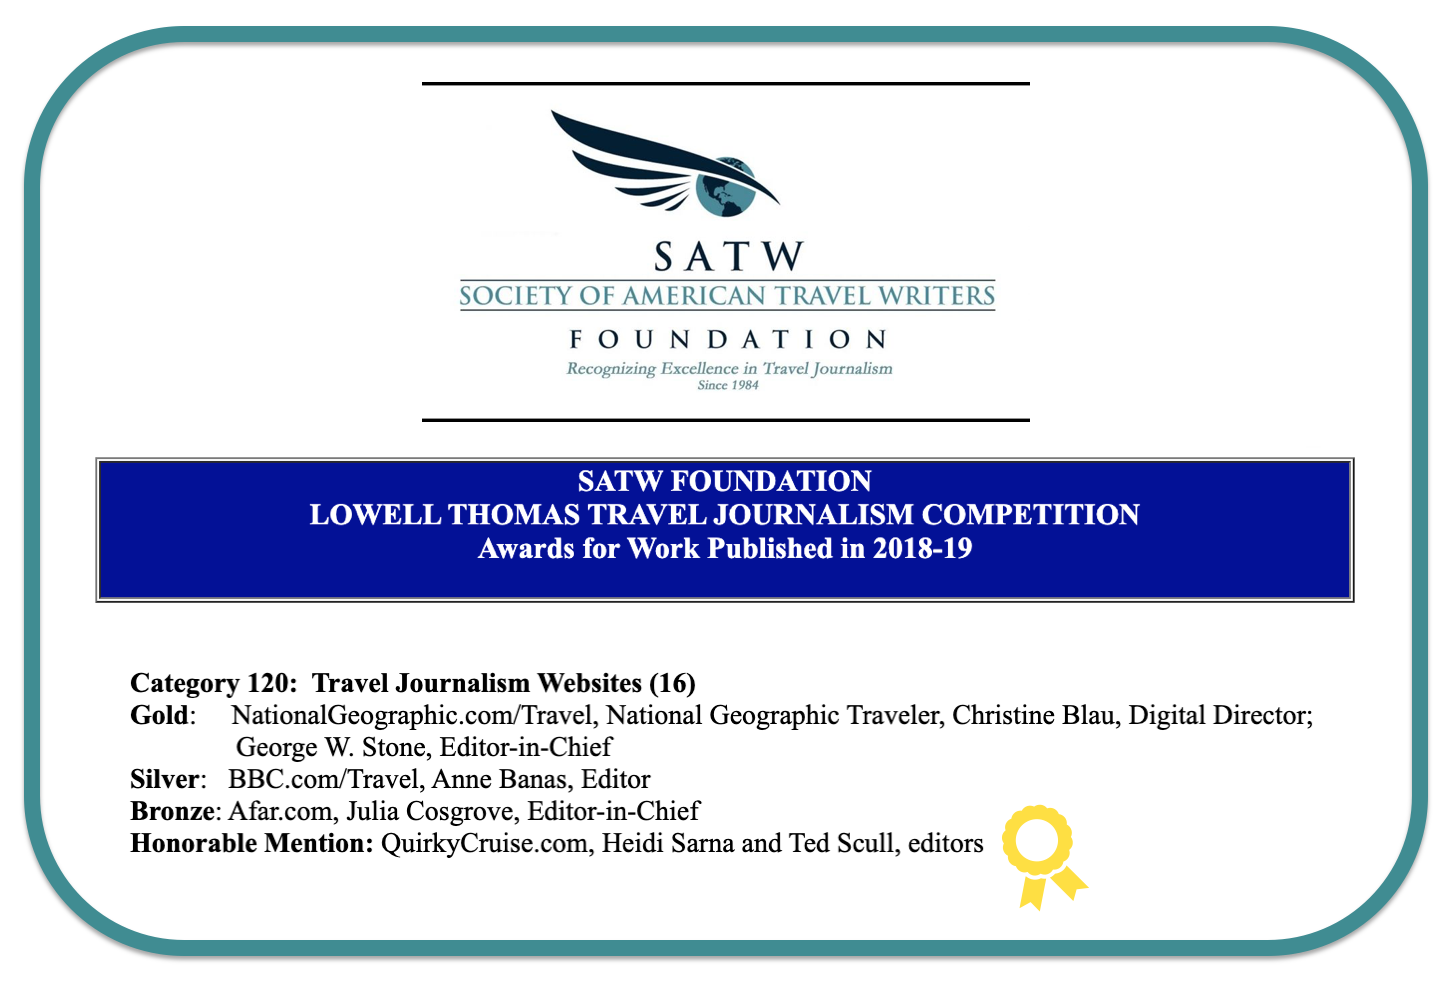 QuirkyCruise Gets Honorable Mention in SATW Lowell Thomas Travel Journalism Awards